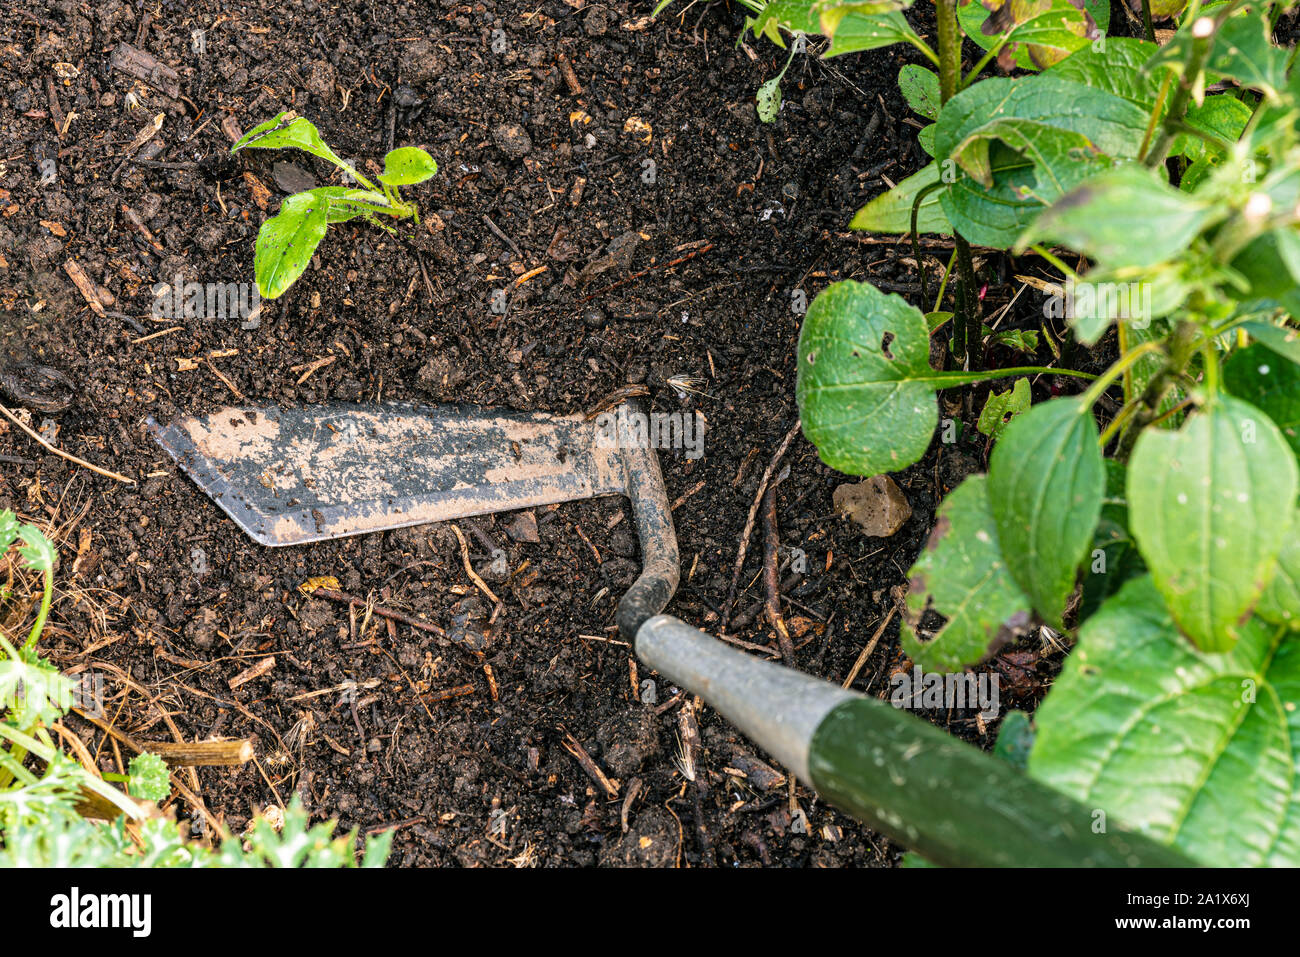 Hoeing to remove unwanted weeds. Weed removal using a garden hoe. Stock Photo